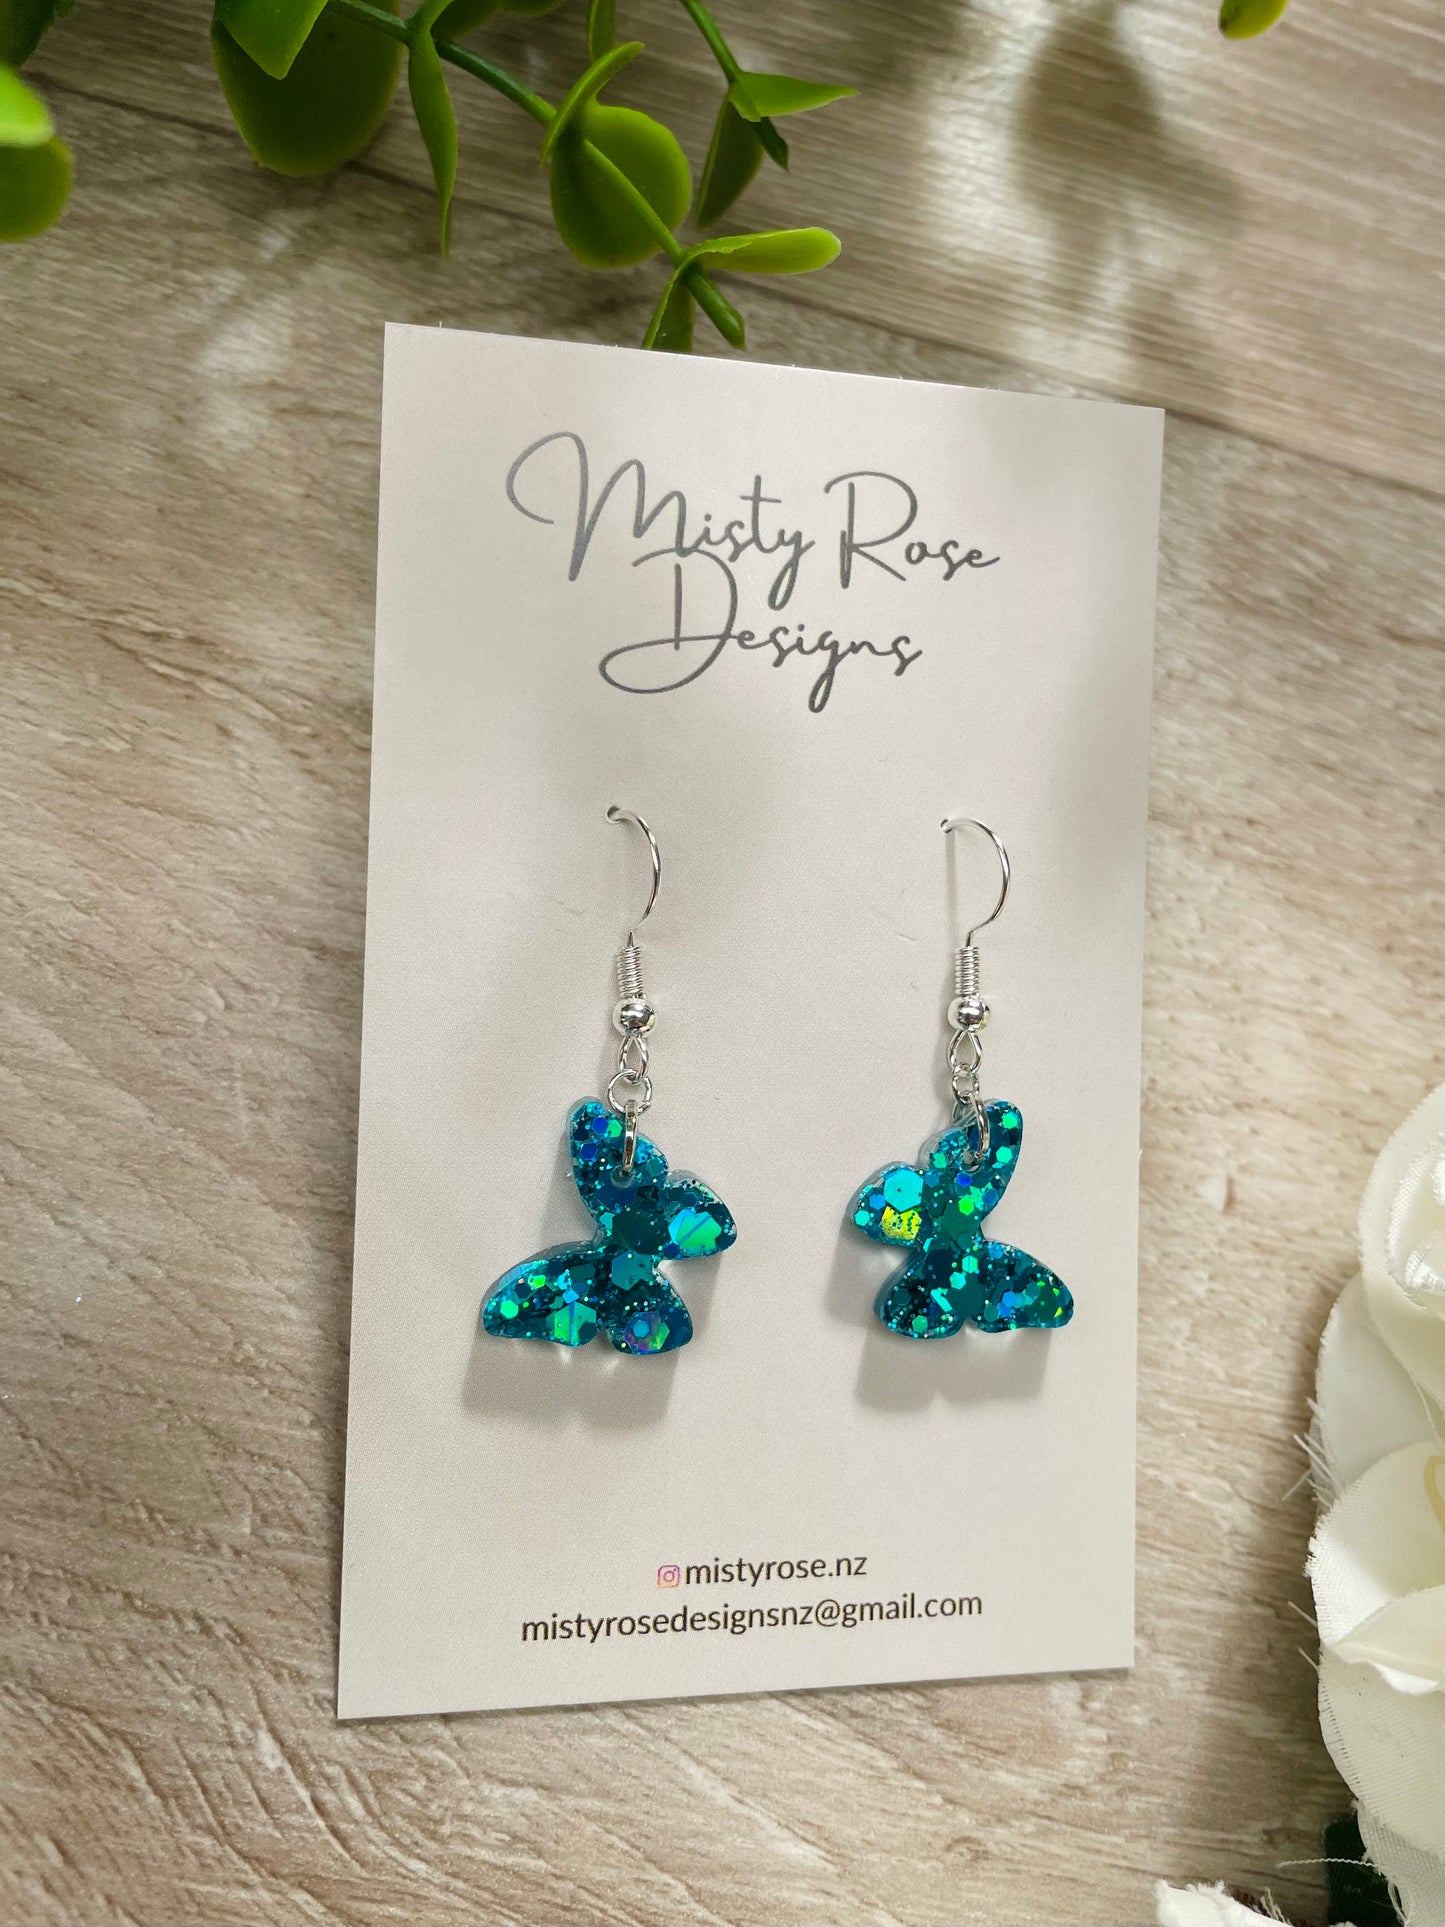 Mini Butterfly Earrings 🦋🦋  These are the most beautiful bright blue tone.  These cute & glittery lightweight earrings are sure to add some sparkle to any look!  Approx 1.7cm x 1.4cm